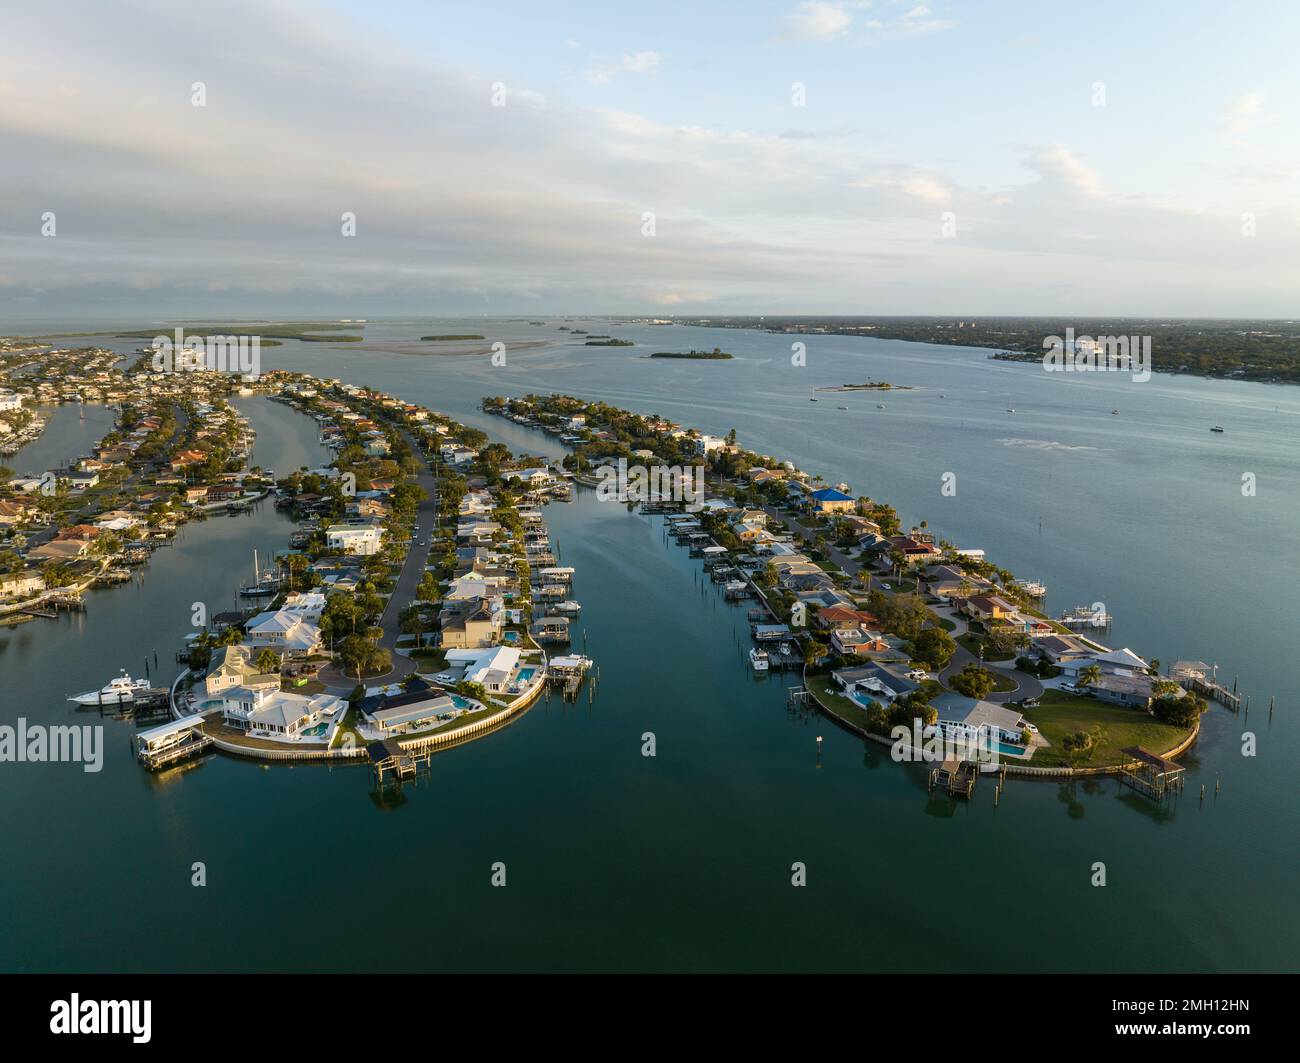 Aerial view of homes on the Gulf Coast of Florida, Clearwater Beach, Pinellas County, Florida, USA. Stock Photo